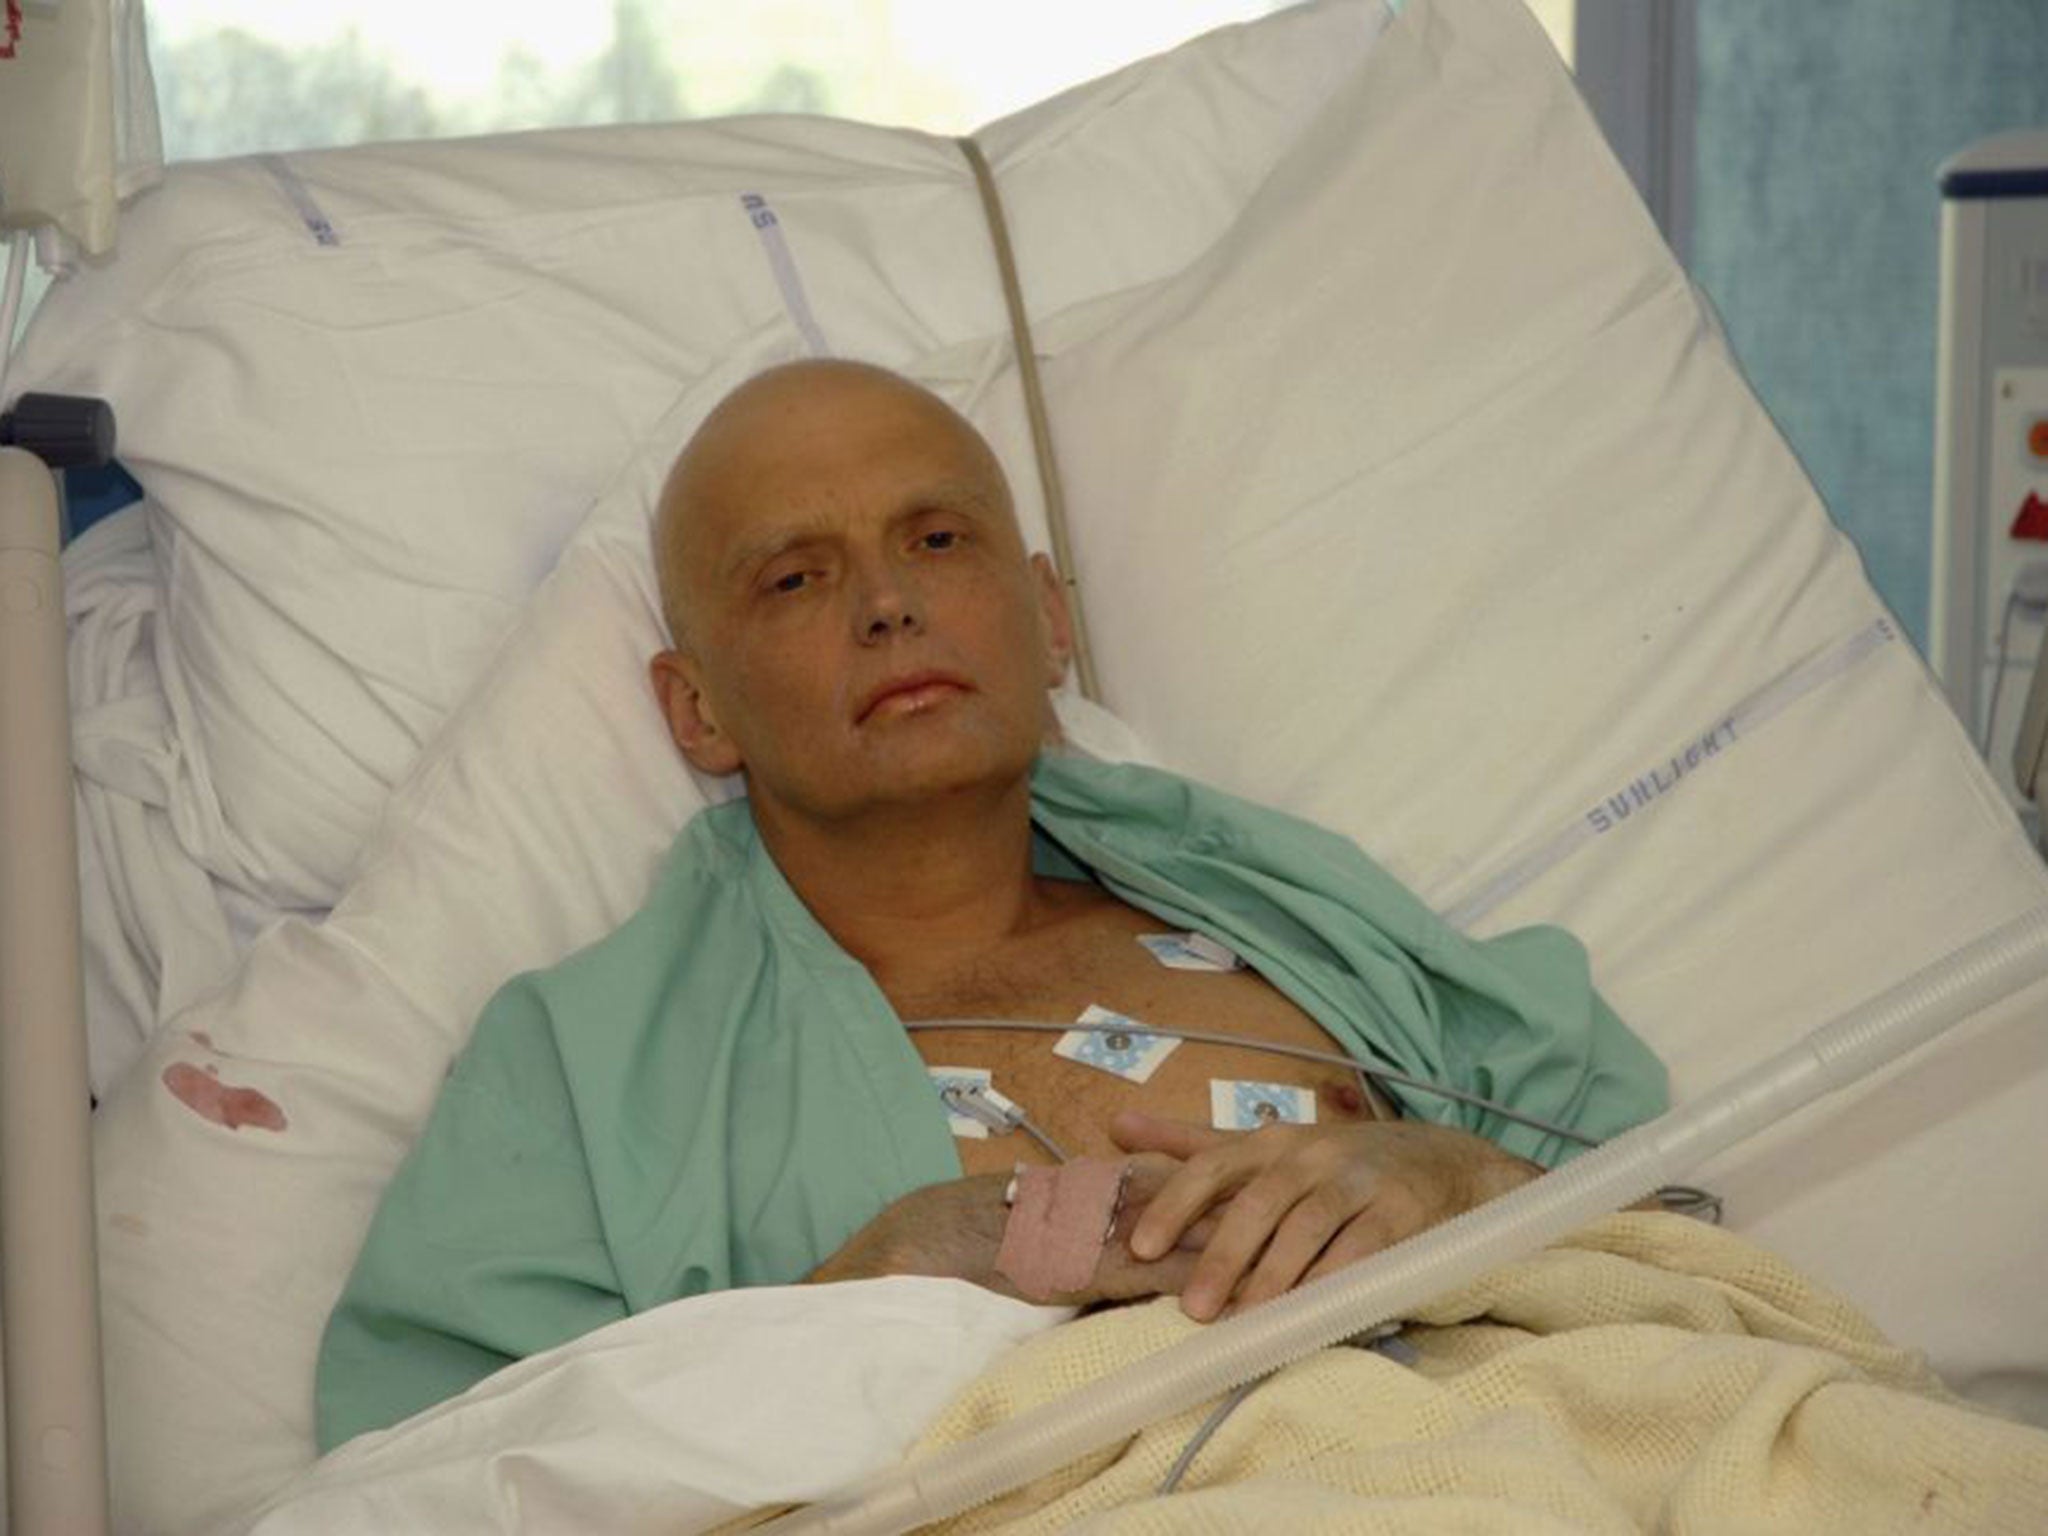 In this image made available on 25 November 2006, Alexander Litvinenko is pictured at the Intensive Care Unit of University College Hospital on 20 November 2006 in London, England (Getty)